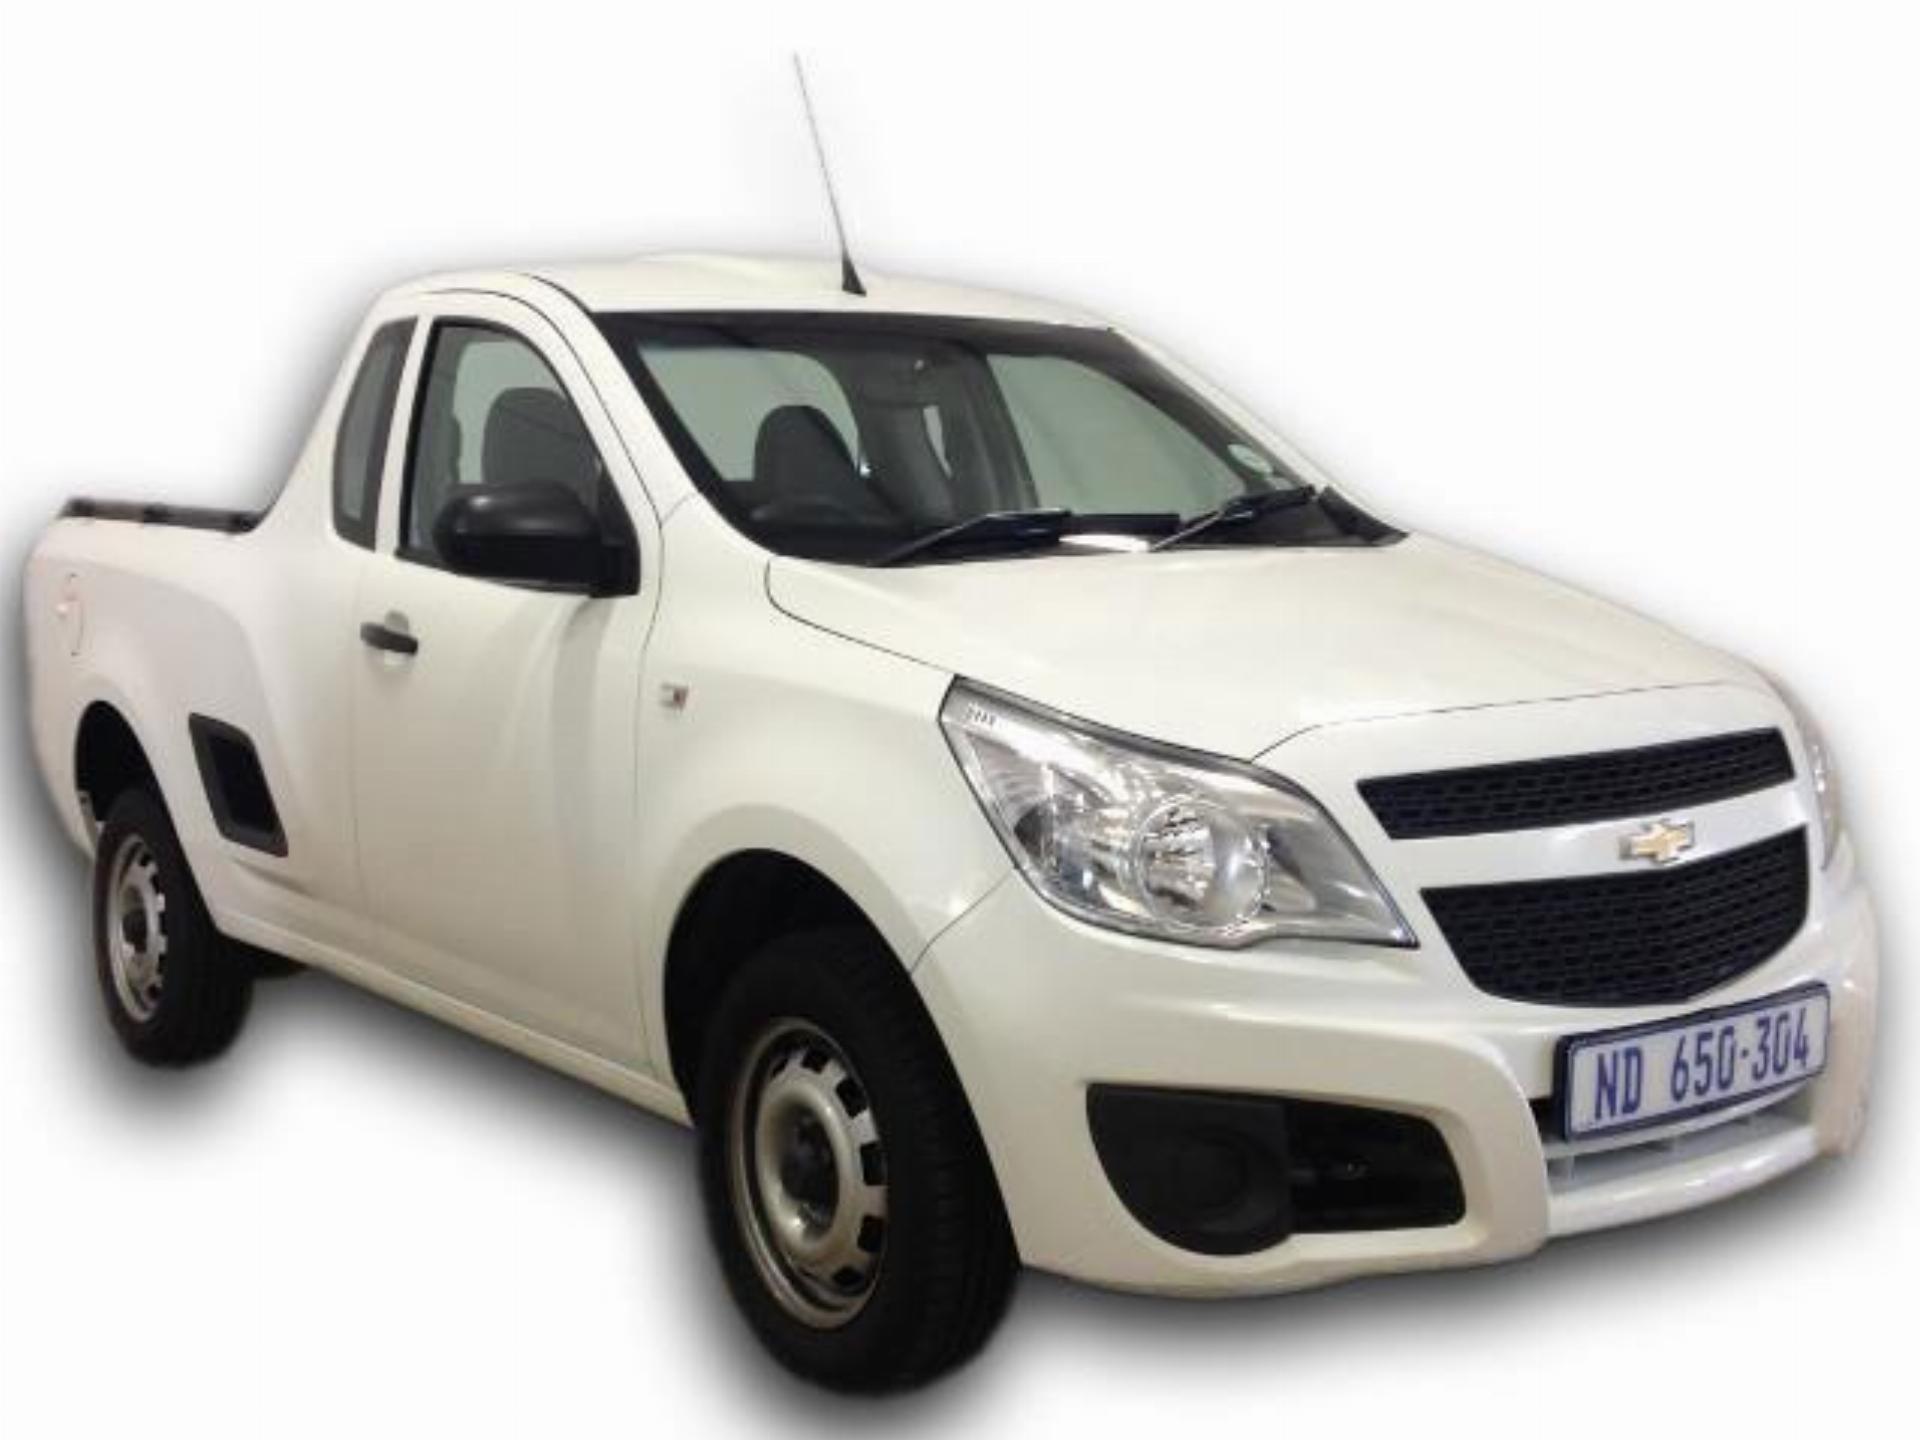 Chevrolet Utility 1.4 A/C, Dual AIRBAGS, Power Steering And Abs